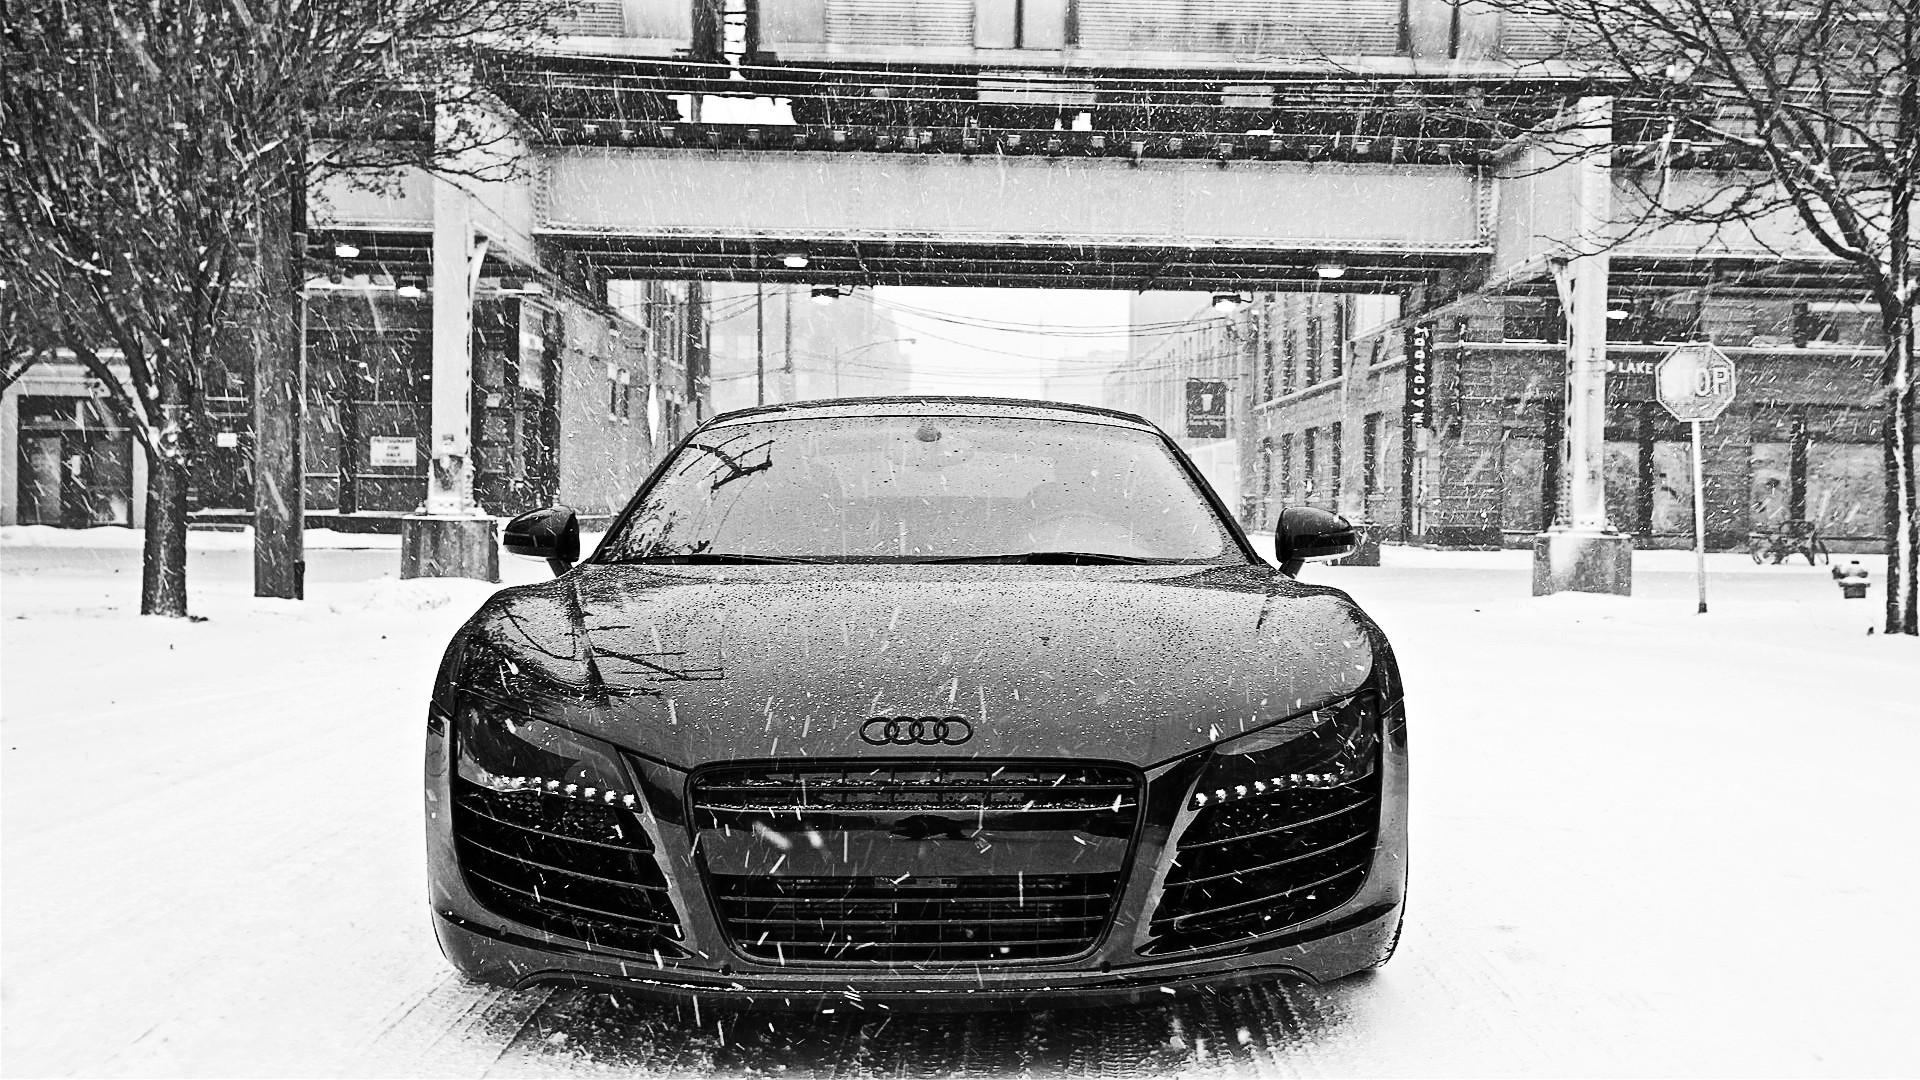 General 1920x1080 car monochrome Audi Audi R8 frontal view vehicle snow winter urban city mid-engine German cars Volkswagen Group